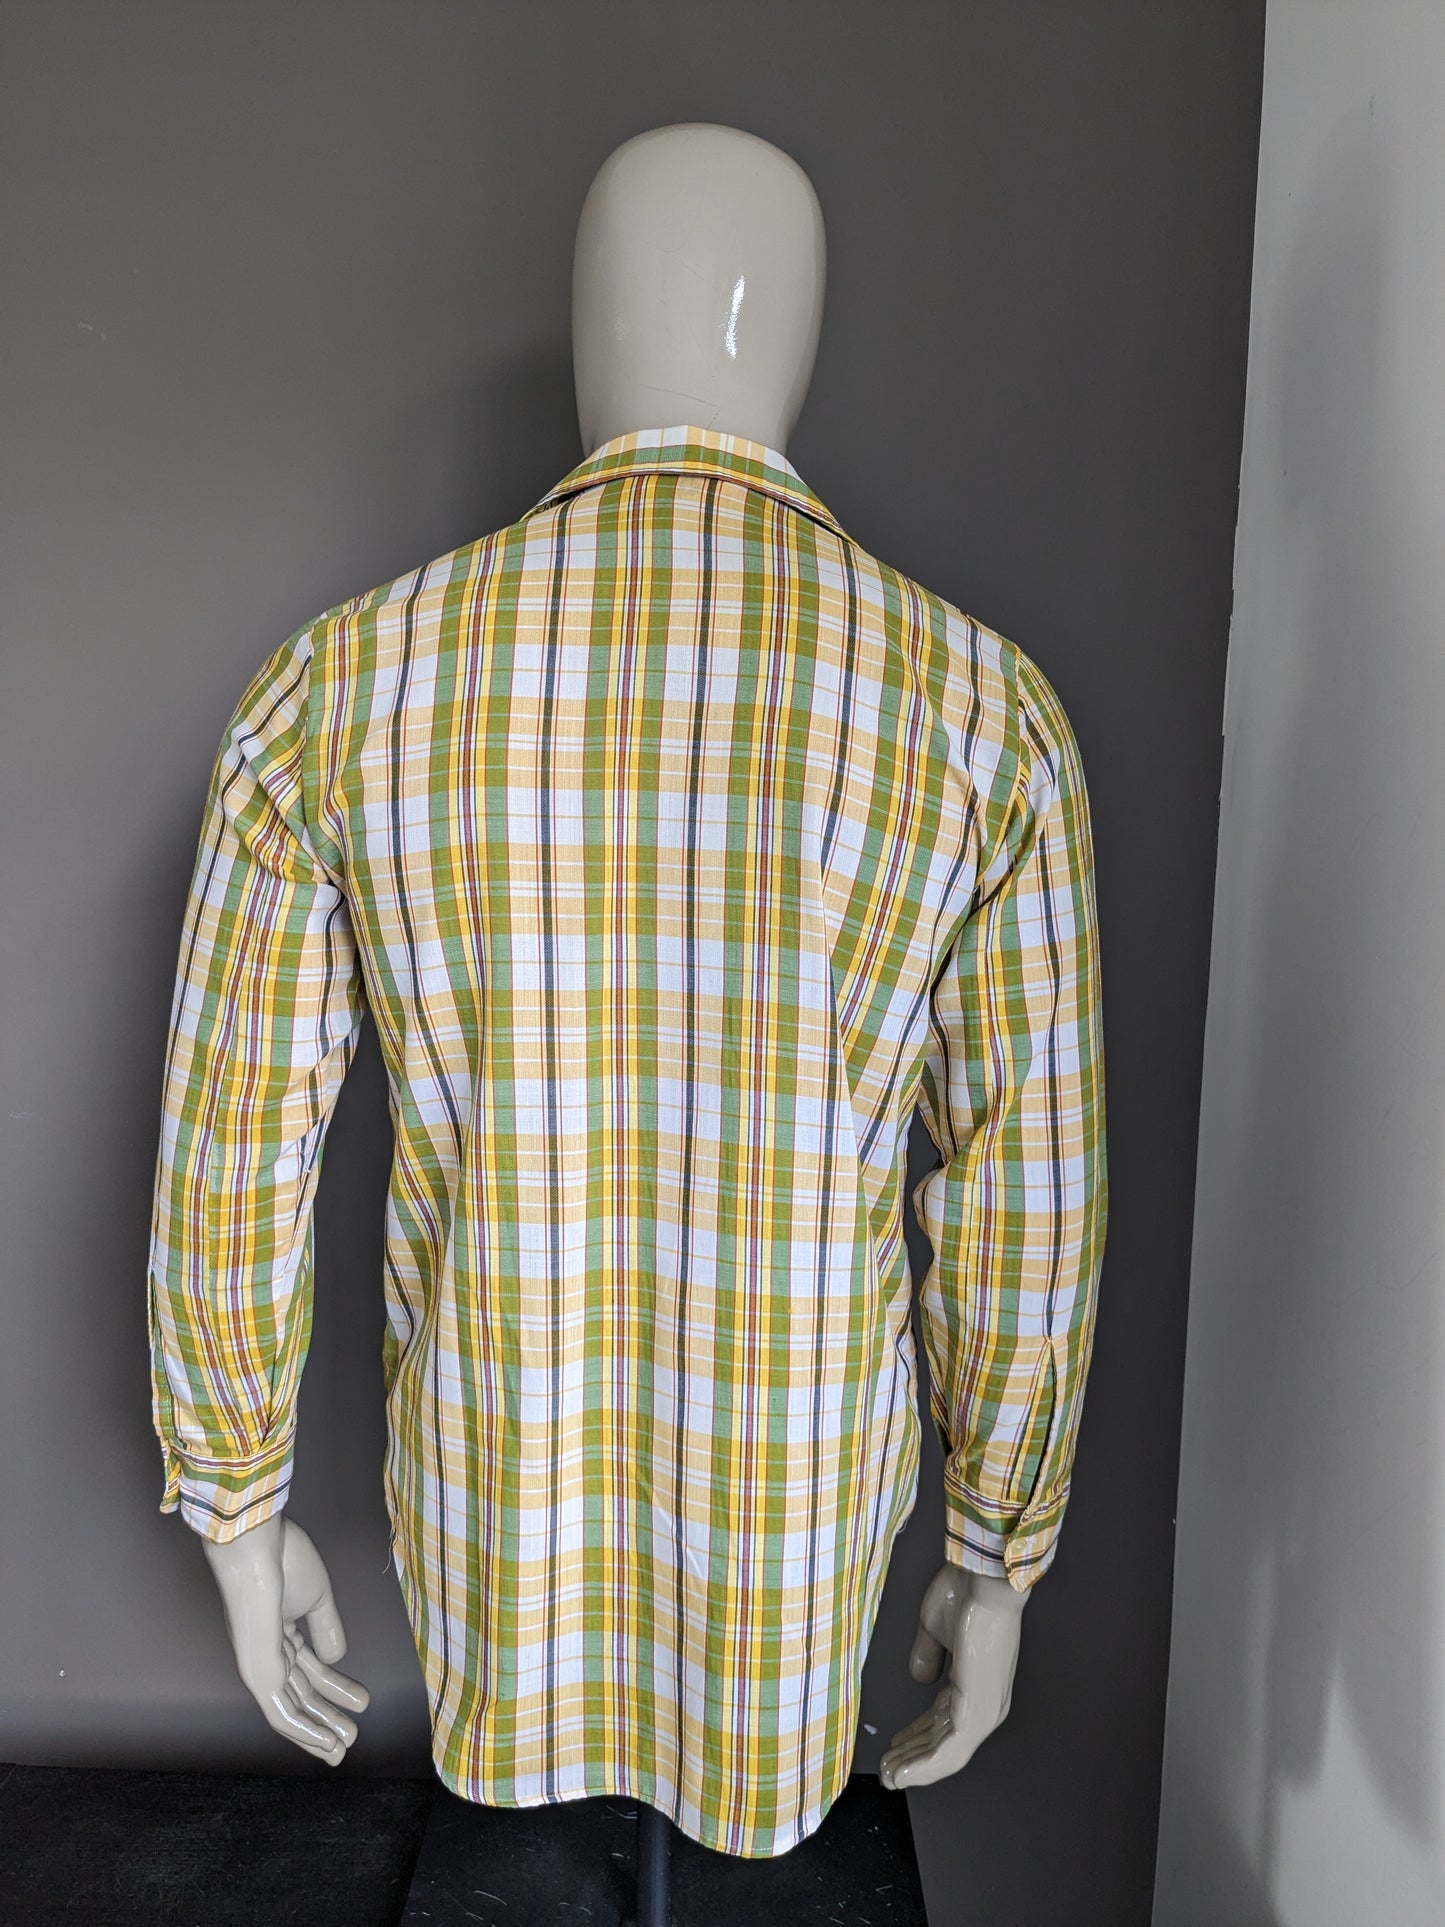 Vintage Fekon shirt with point collar. Yellow green red checked. Size M.